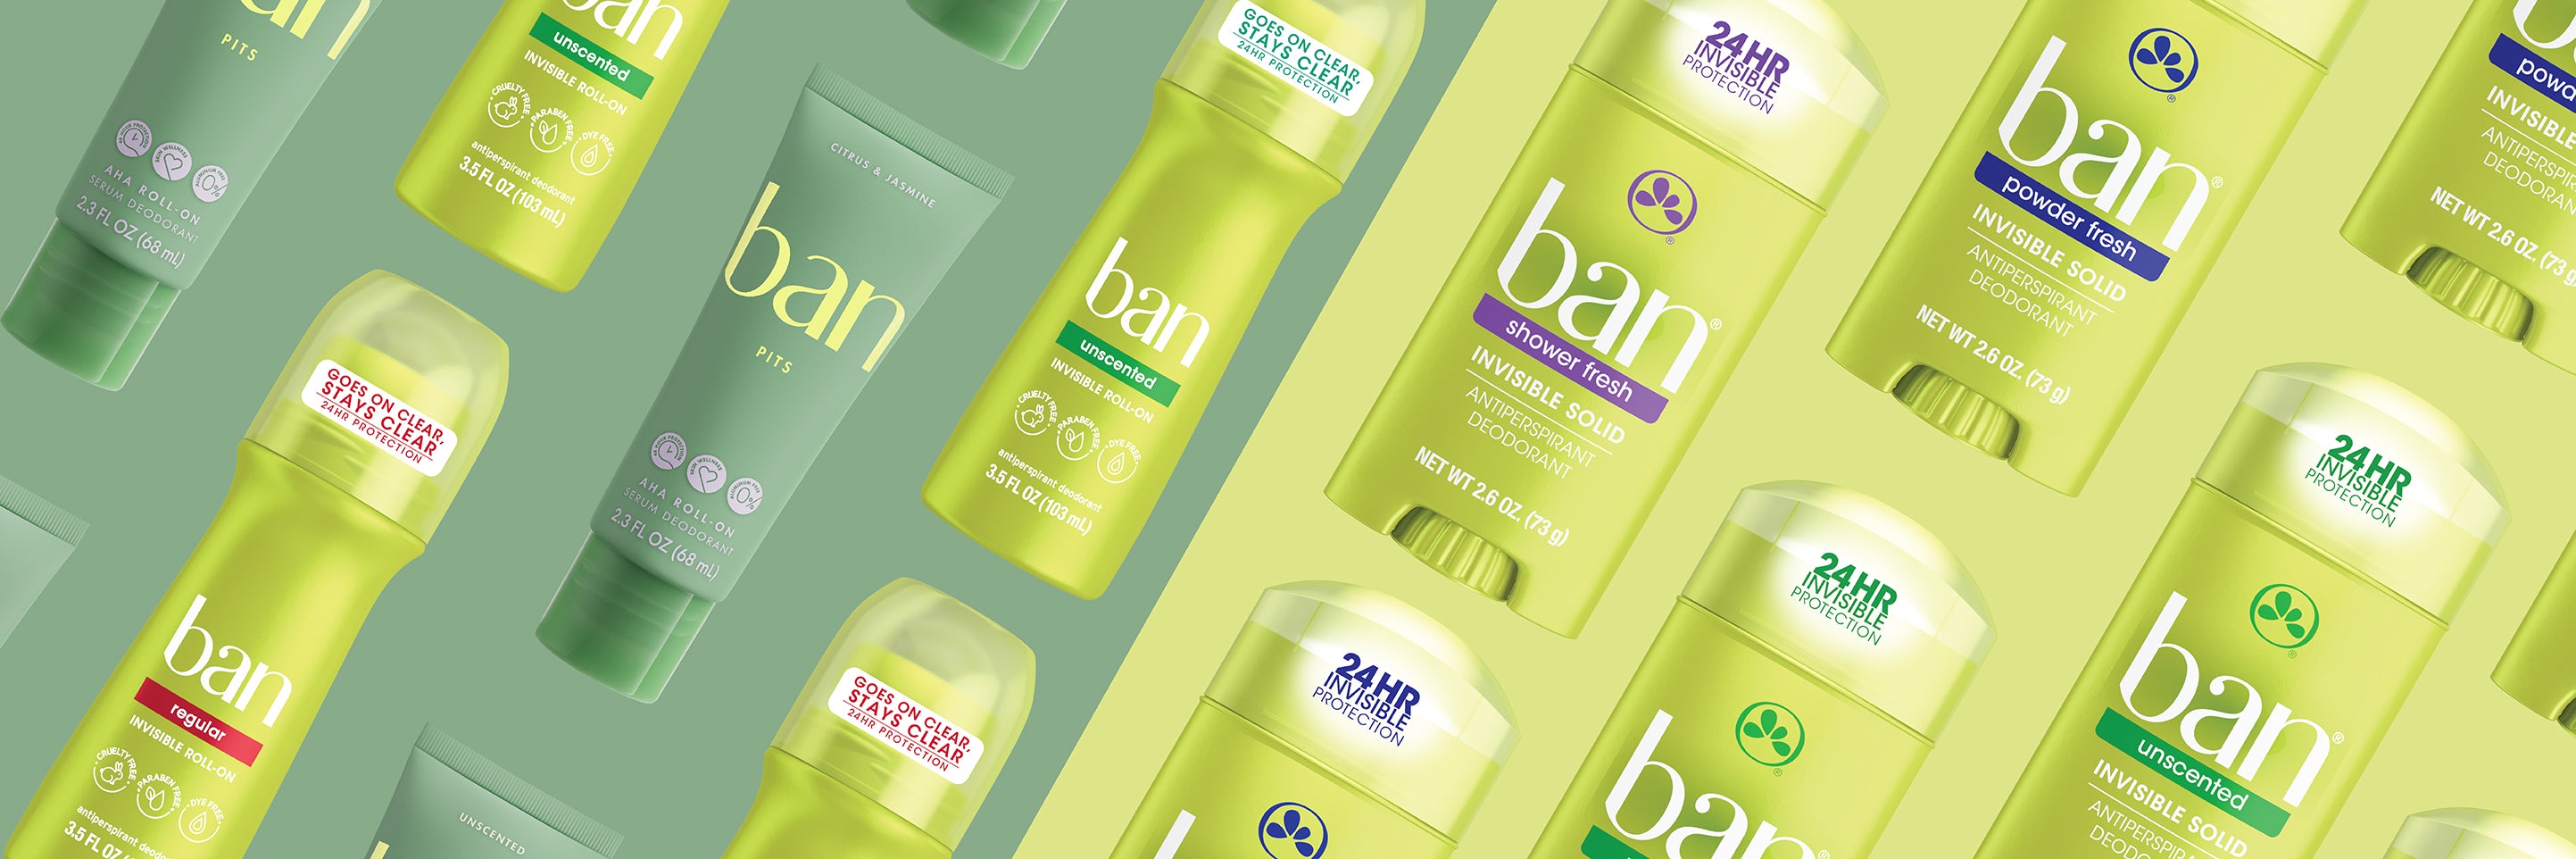 Roll-On Vs. Solid Deodorant: The Essential Guide